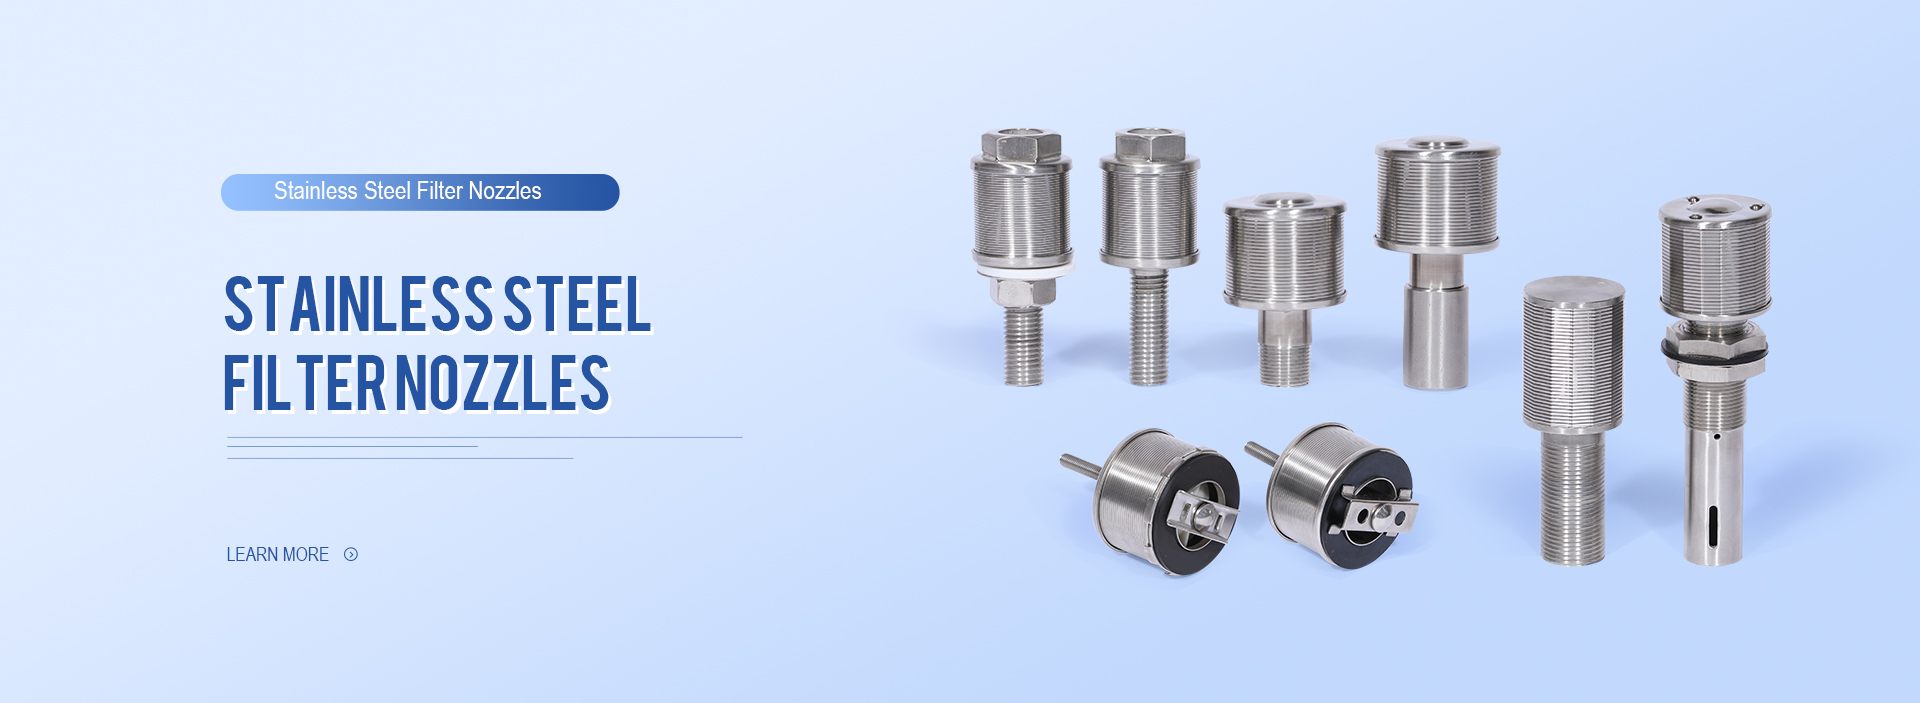 Stainless vy sivana Nozzles